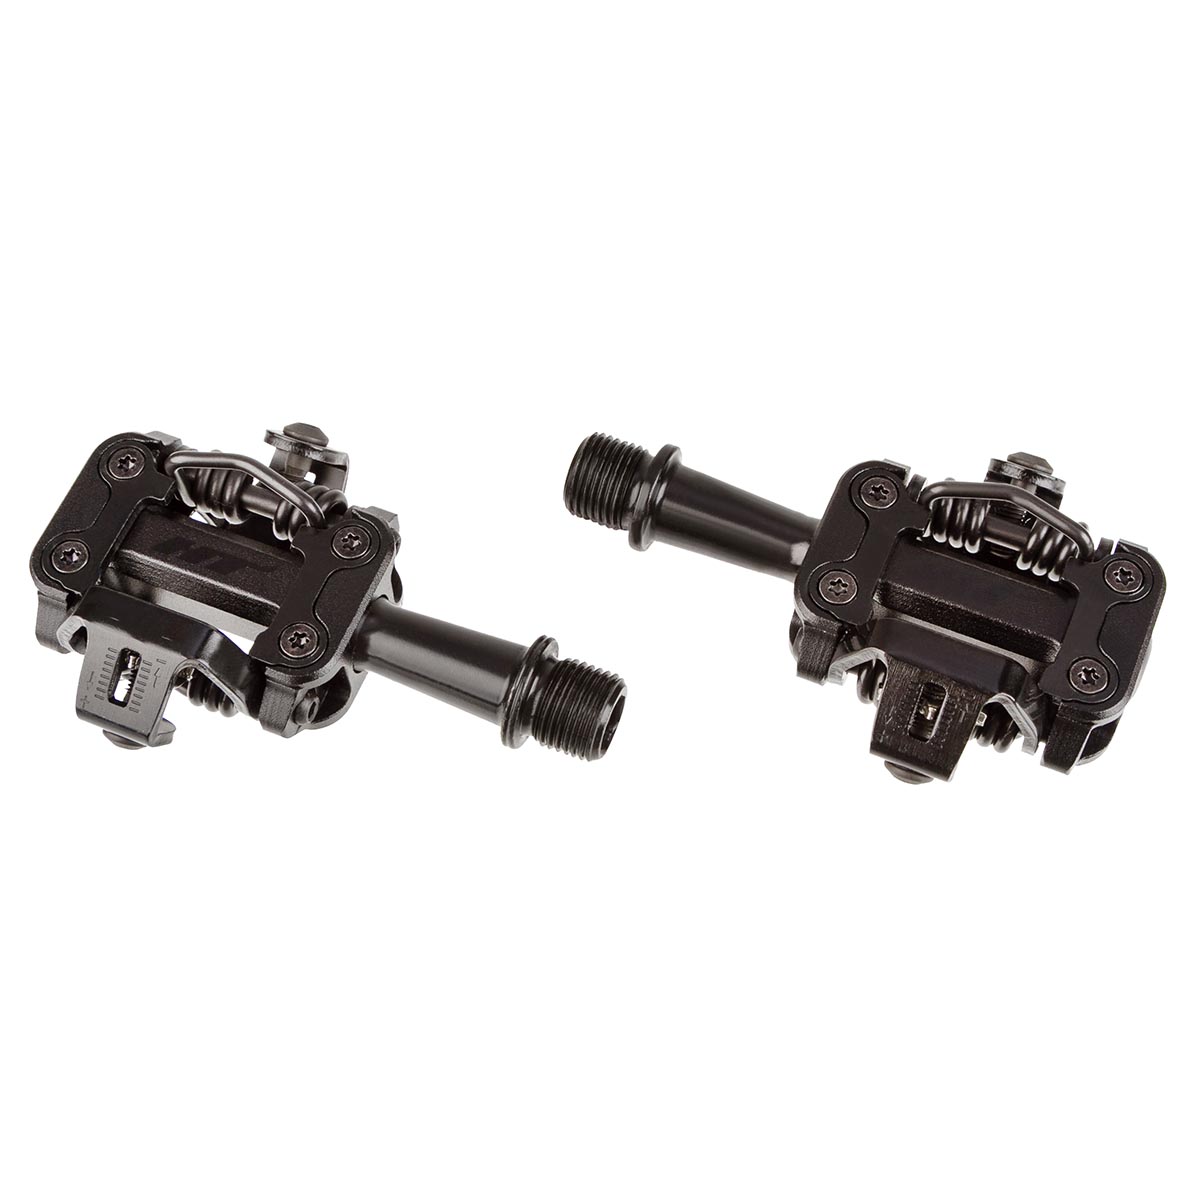 HT Components Pedals M1 XC Stealth Black